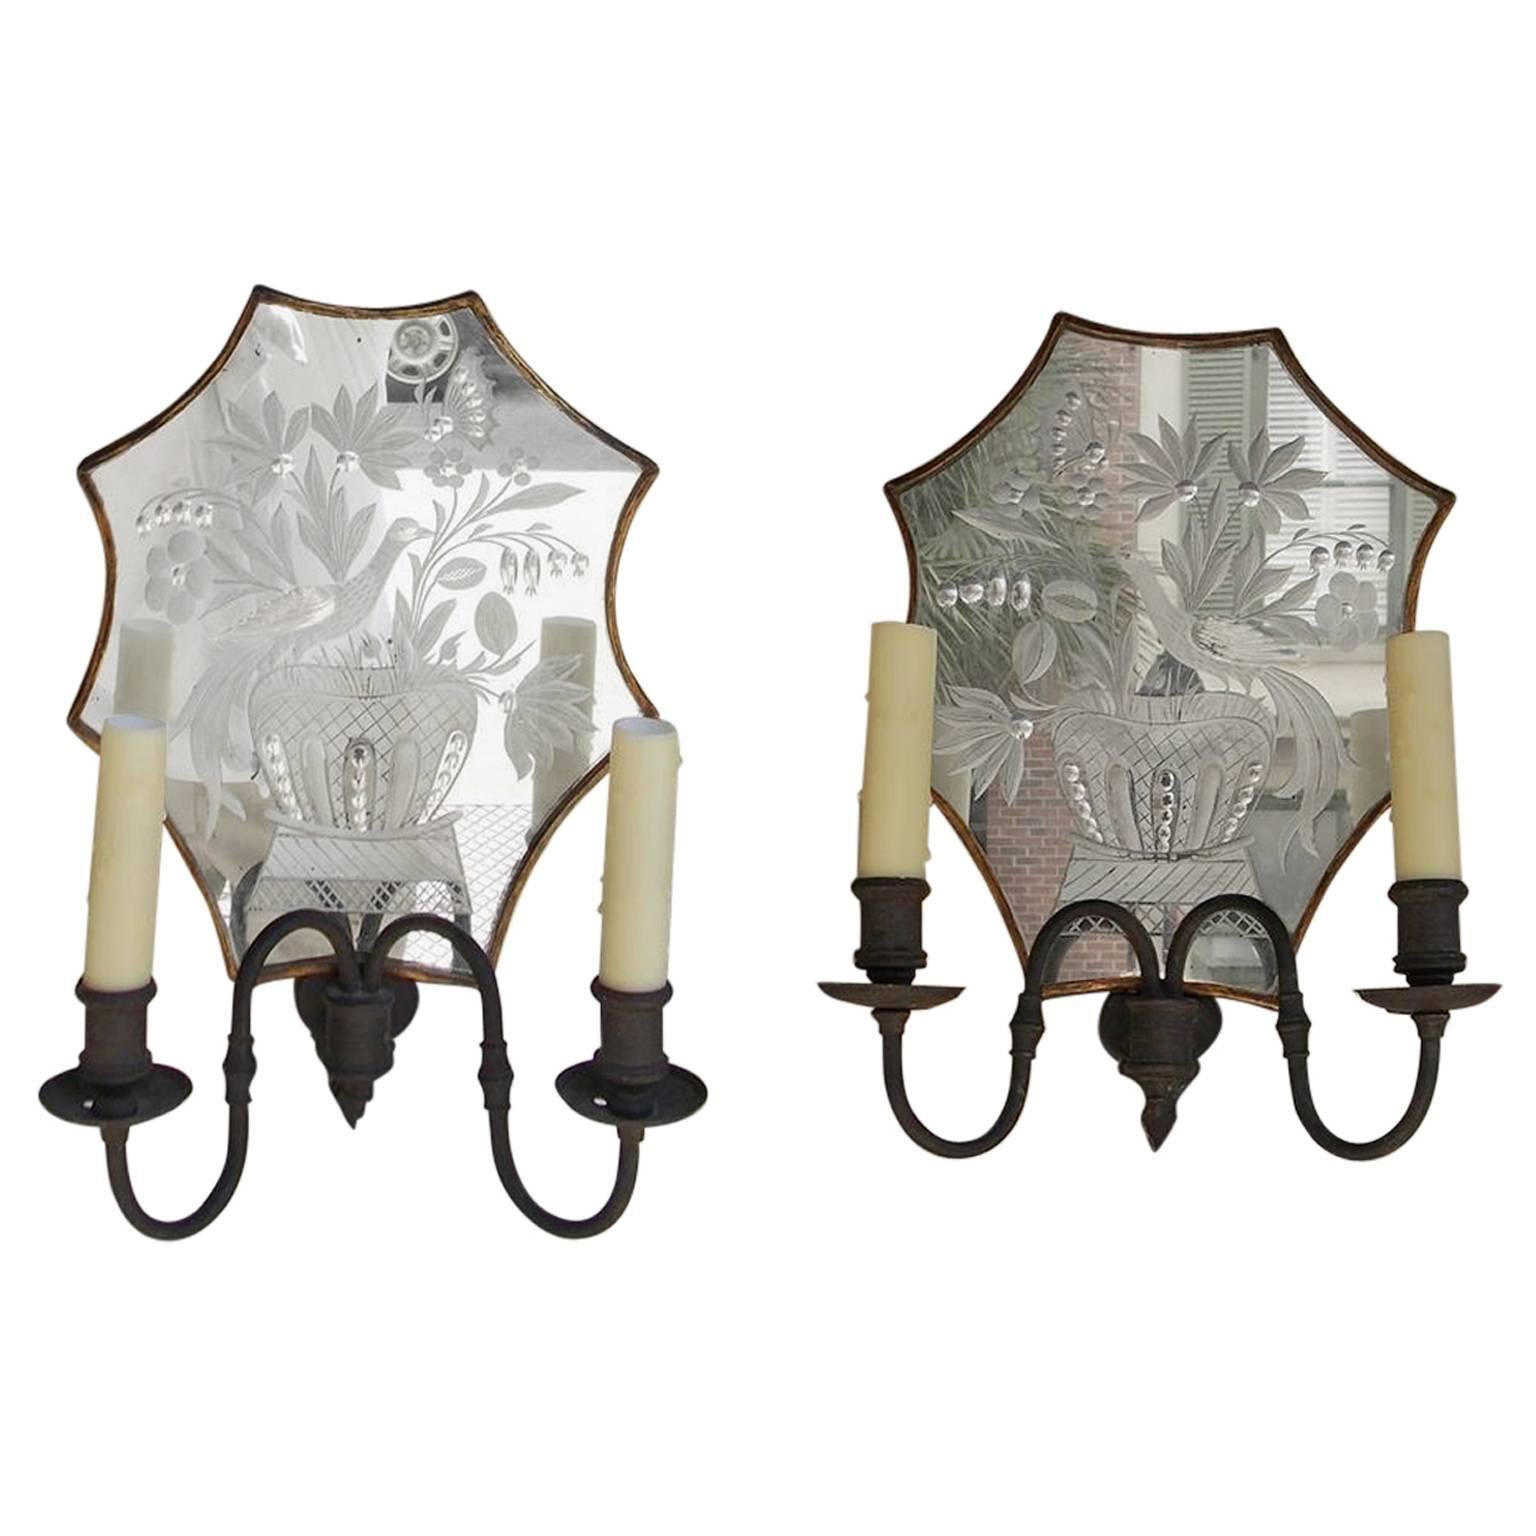 Pair of Venetian Bronze & Decorative Etched Mirrored Wall Sconces, C. 1800